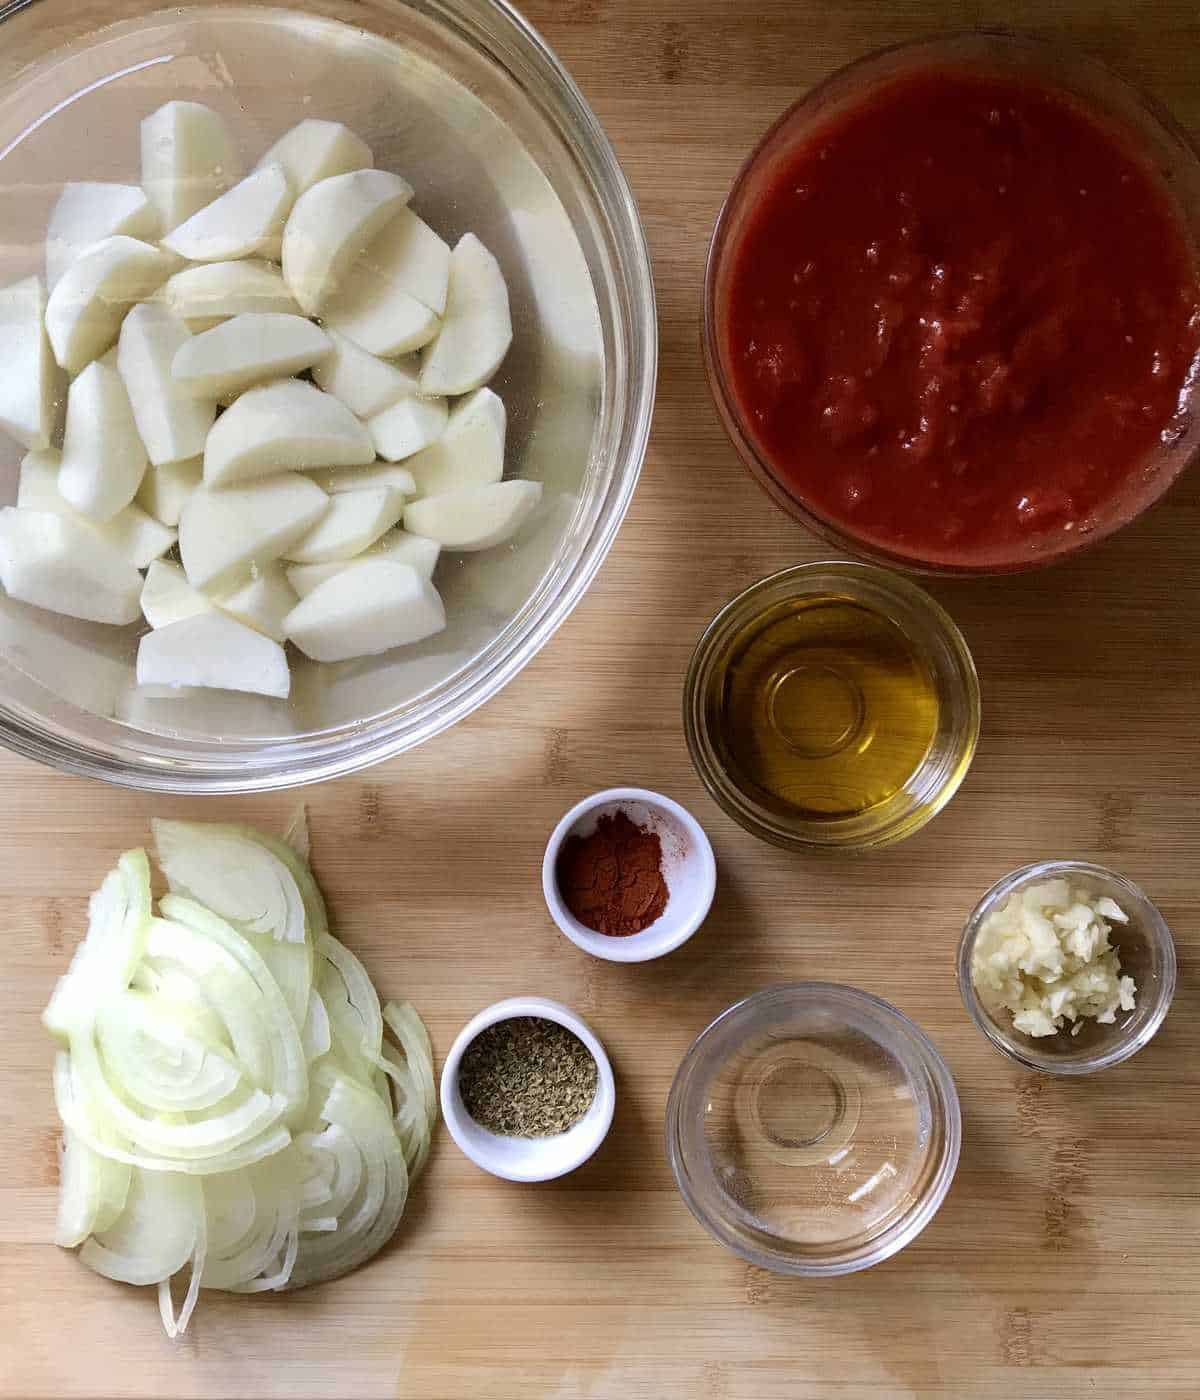 The prepped ingredients to make the Italian Potato Recipe are prepped and placed on a wooden board.